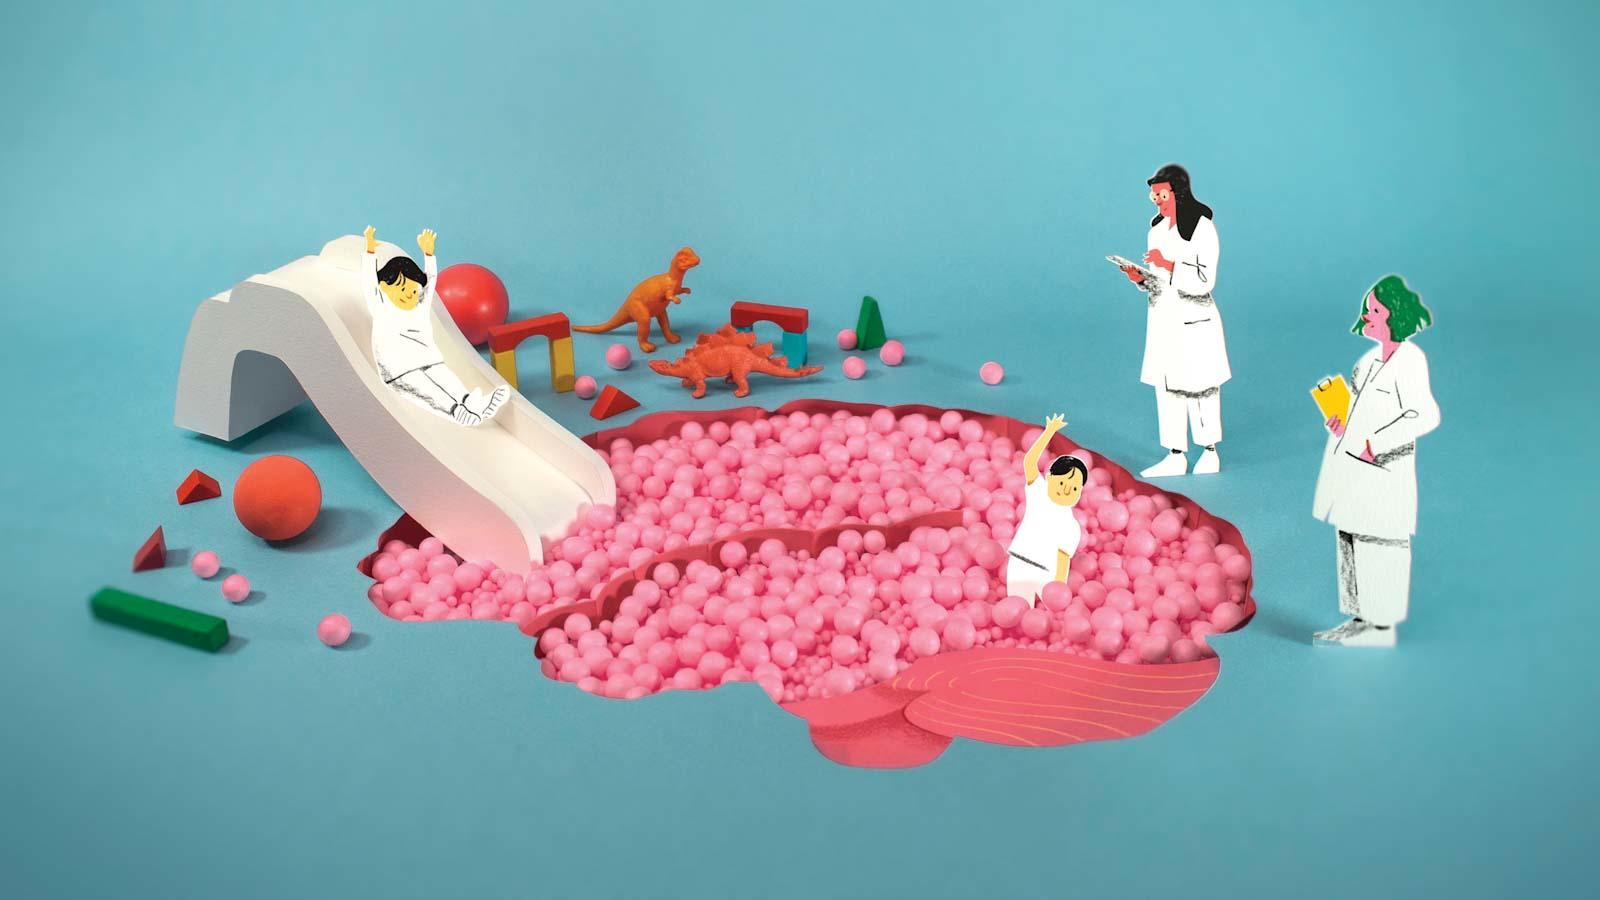 3D illustration of toddlers playing on a slide and ball pit